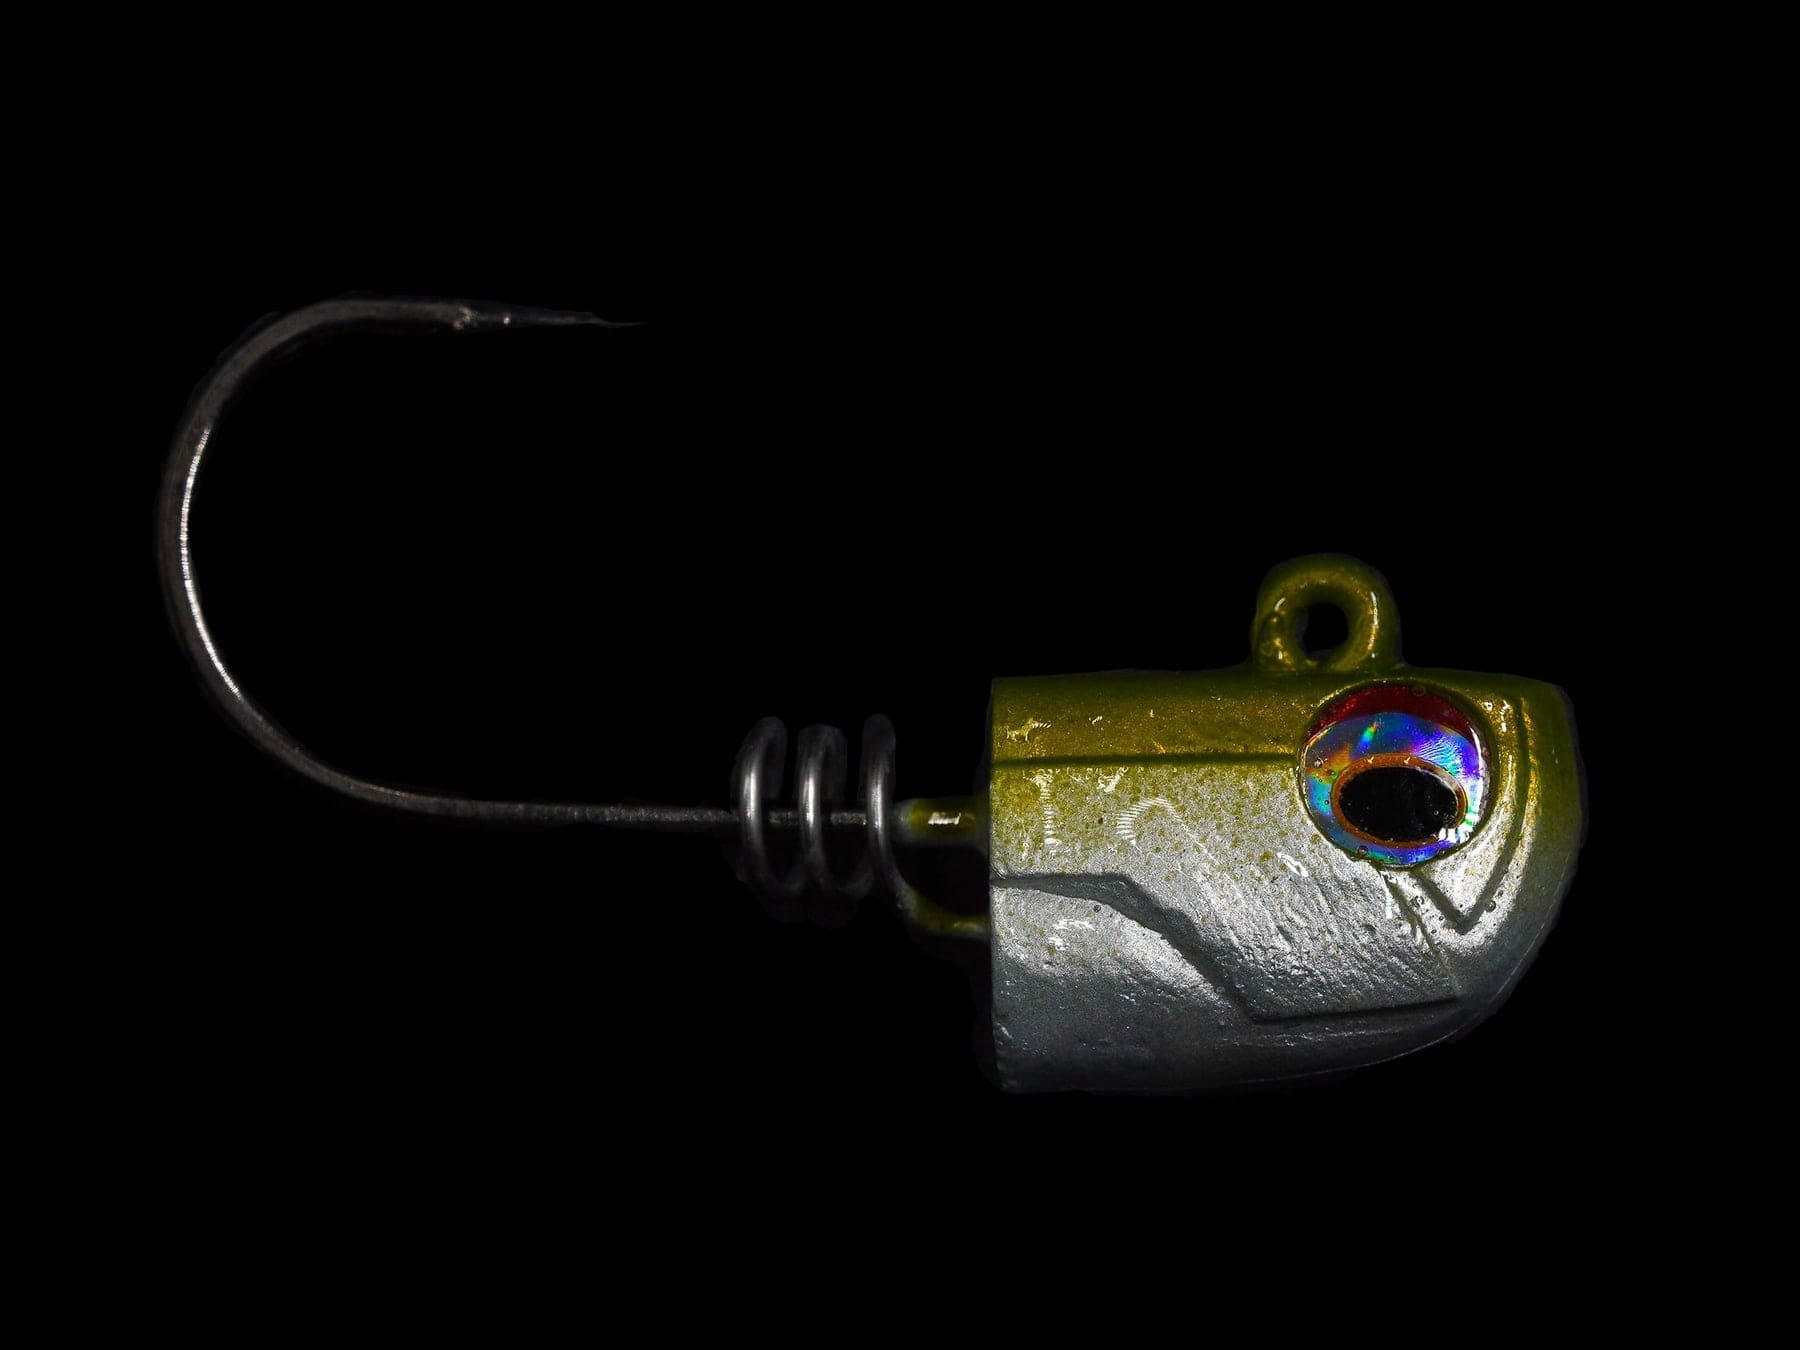 Jig Heads for Fishing hooks Paint Worm Lure Saltwater Jig Head